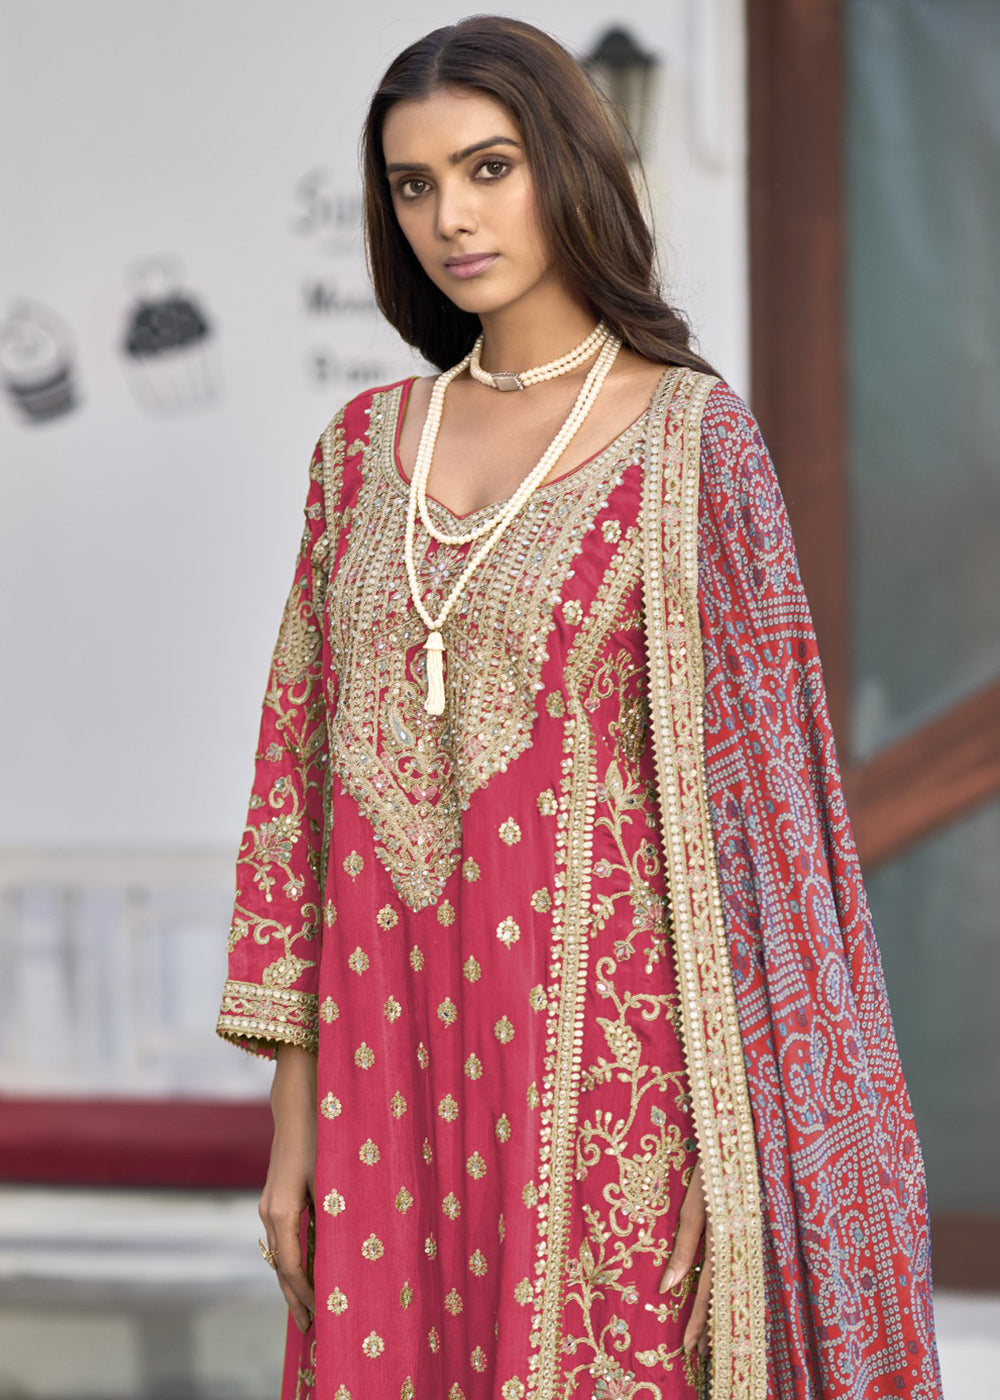 Buy Now Wedding Wear Pink Palazzo Suit with Bandhej Dupatta Online in USA, UK, Canada, Germany, Australia & Worldwide at Empress Clothing.